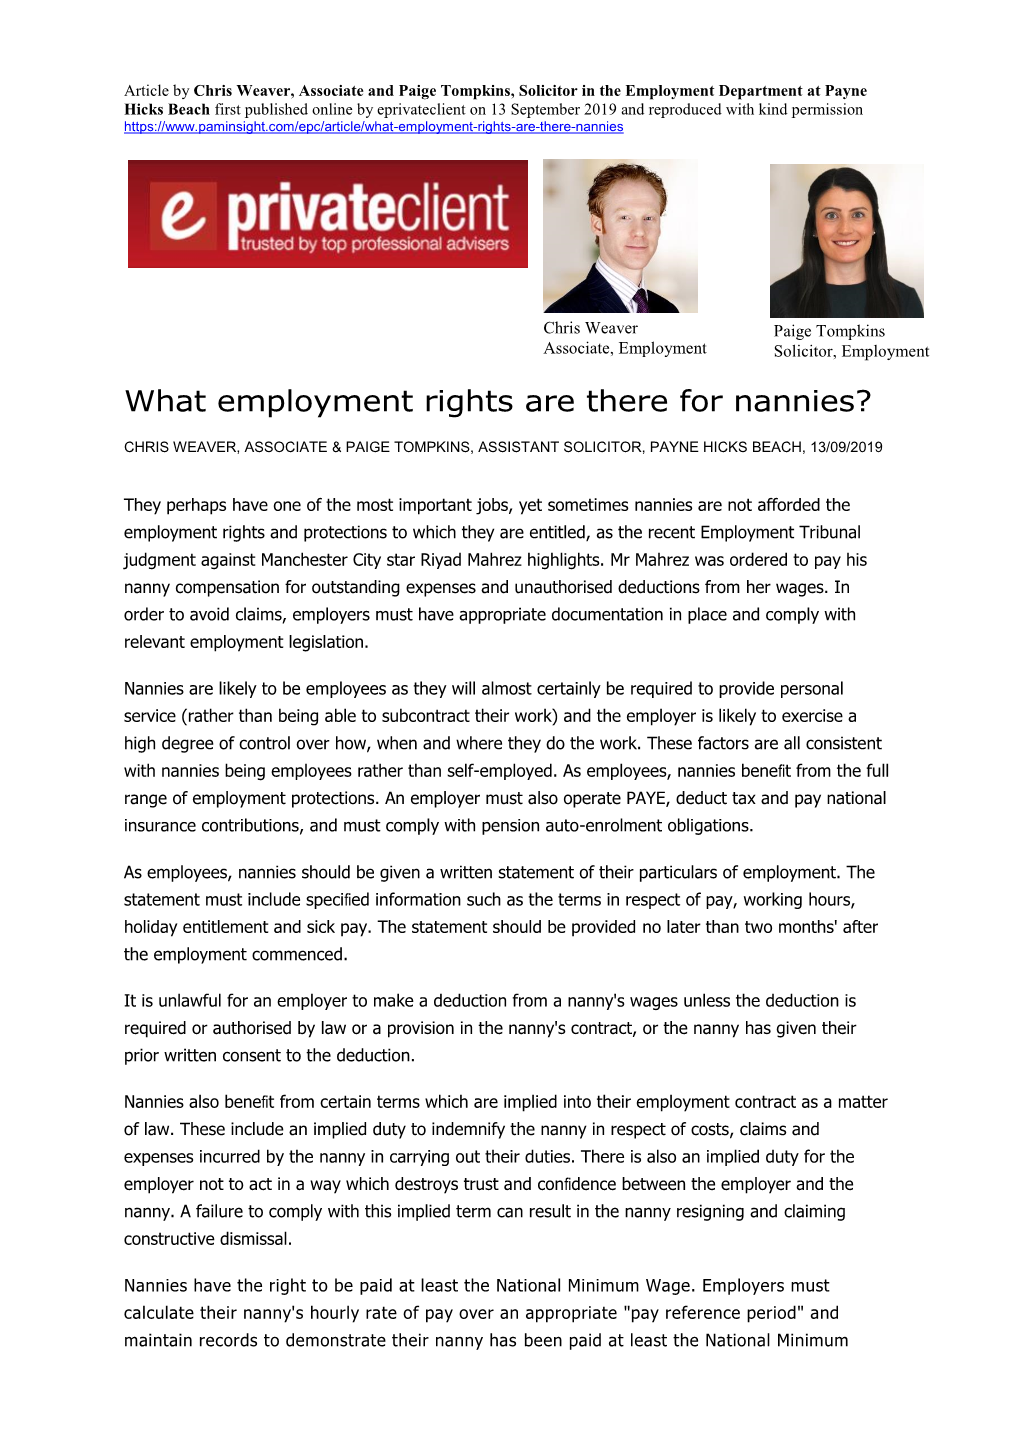 What Employment Rights Are There for Nannies?